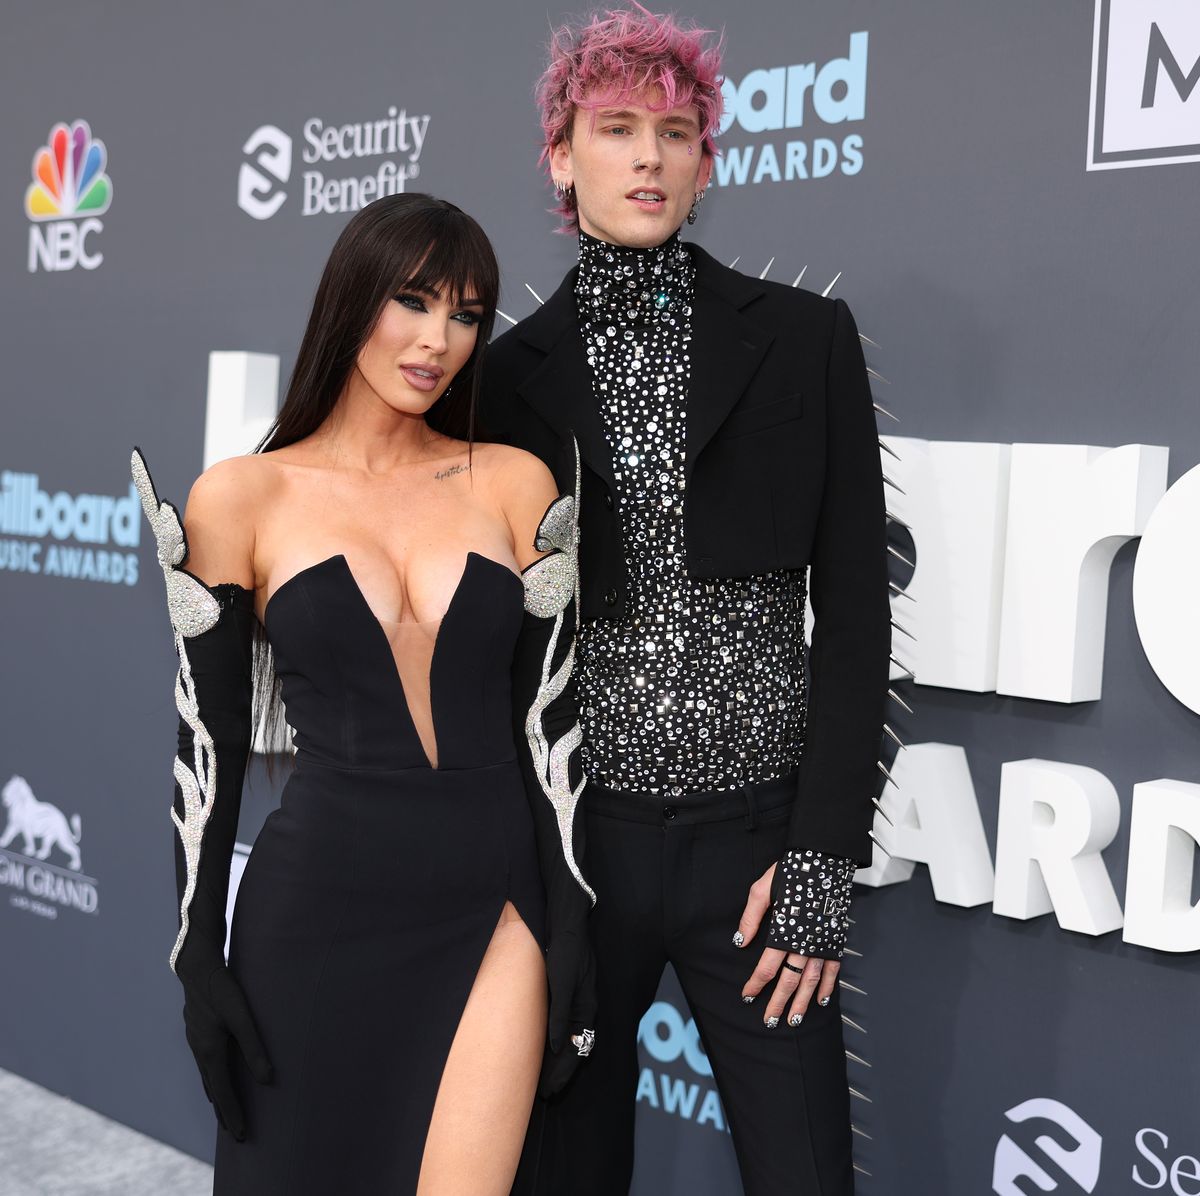 American Music Awards May Skip 2023 as BBMAs Take Date with No Network